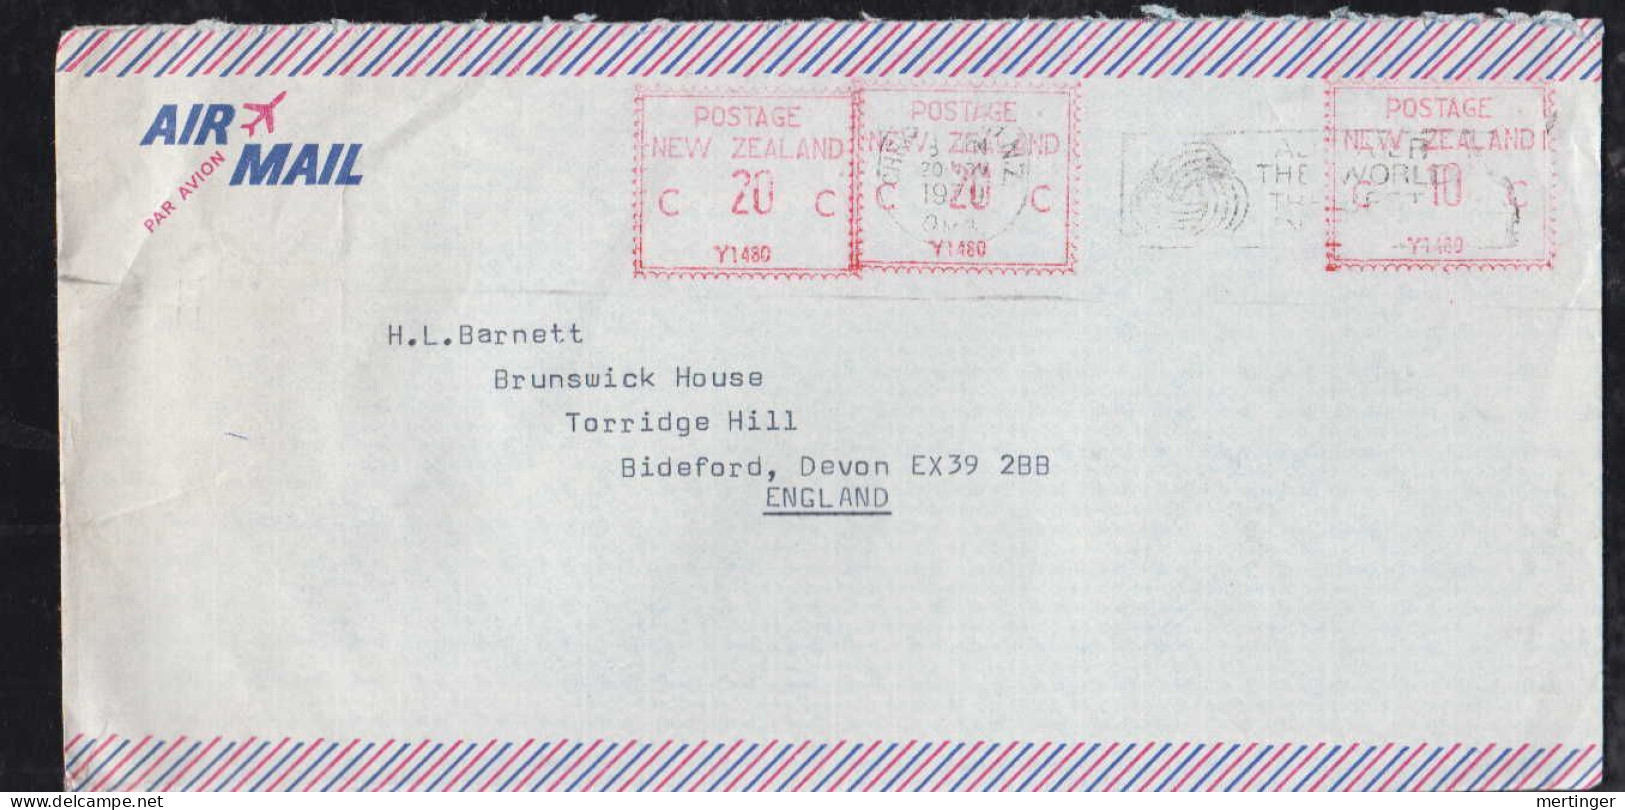 New Zealand 1979 Meter Airmail Cover 2x20c + 10c CHRISTCHURCH To BIDEFORD England - Covers & Documents